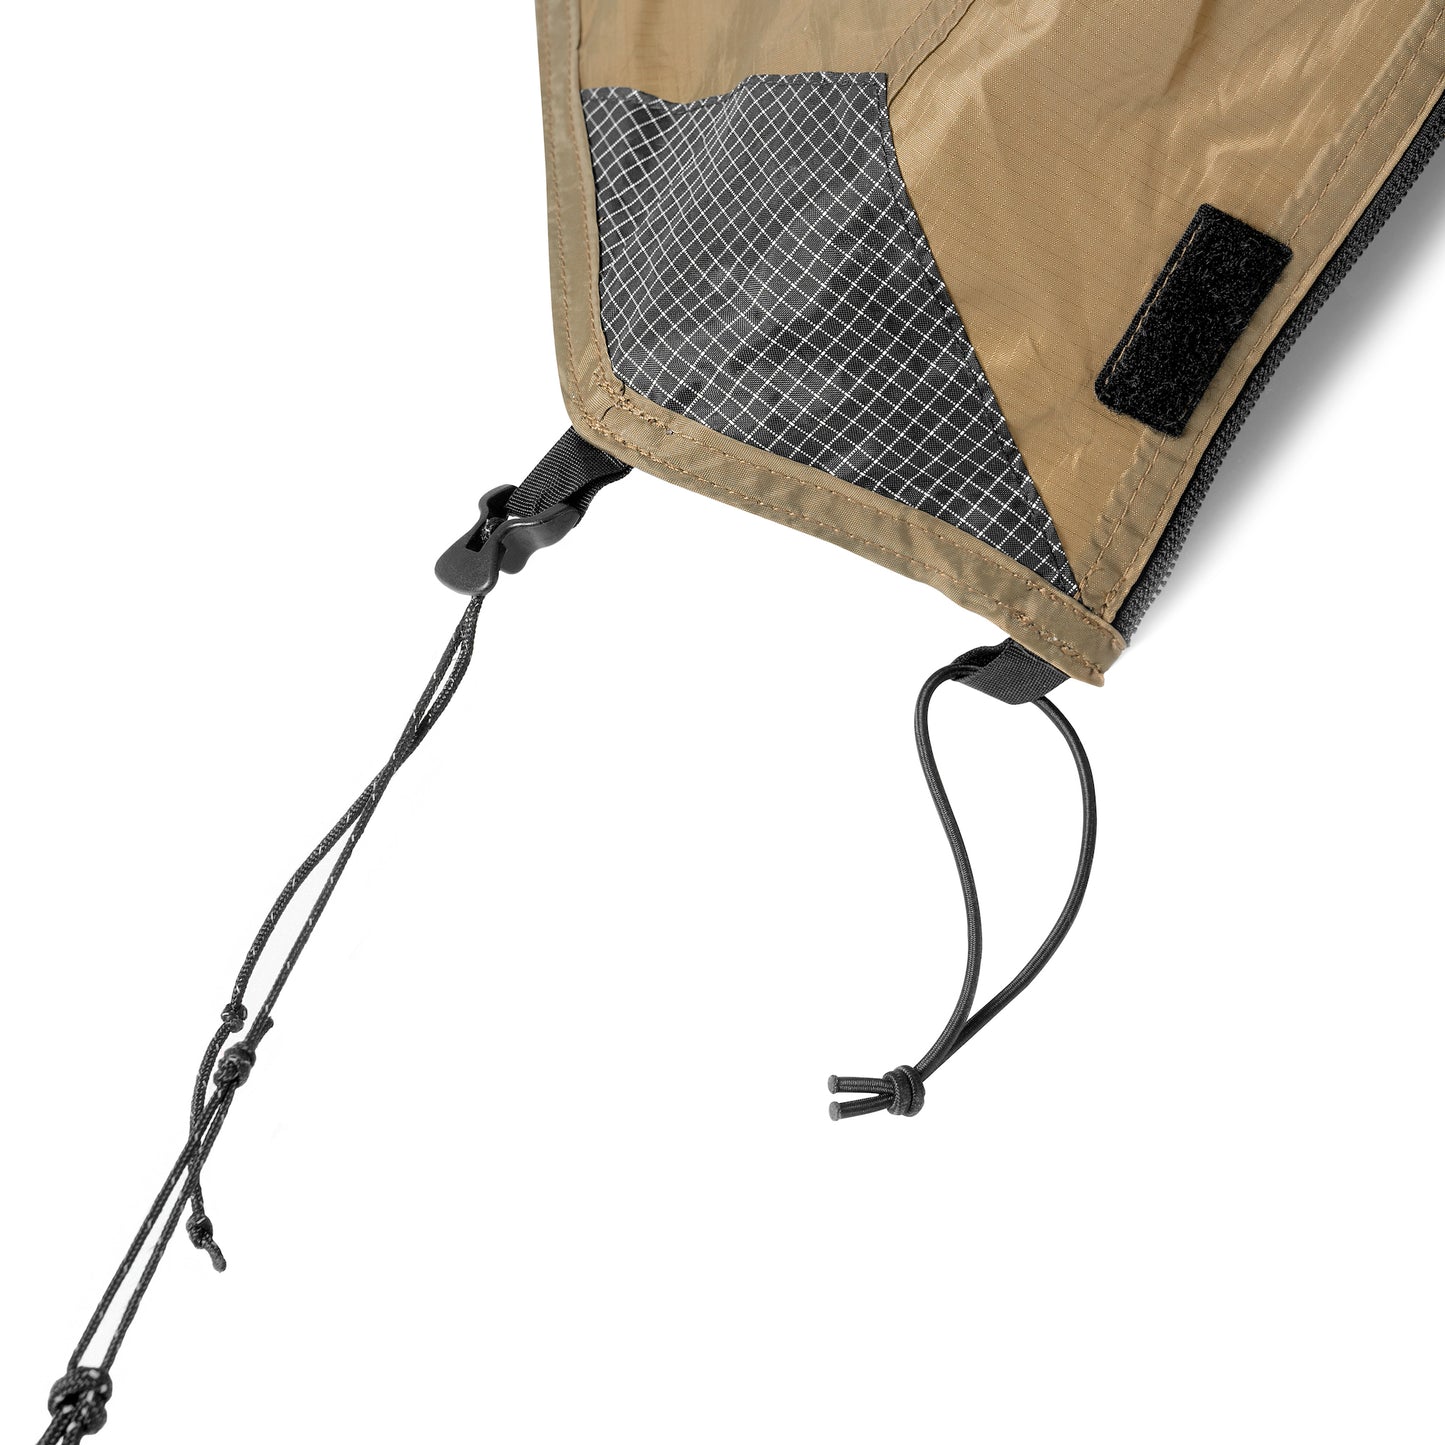 Tac. Cot Tent Solo Fly - Coyote Tan